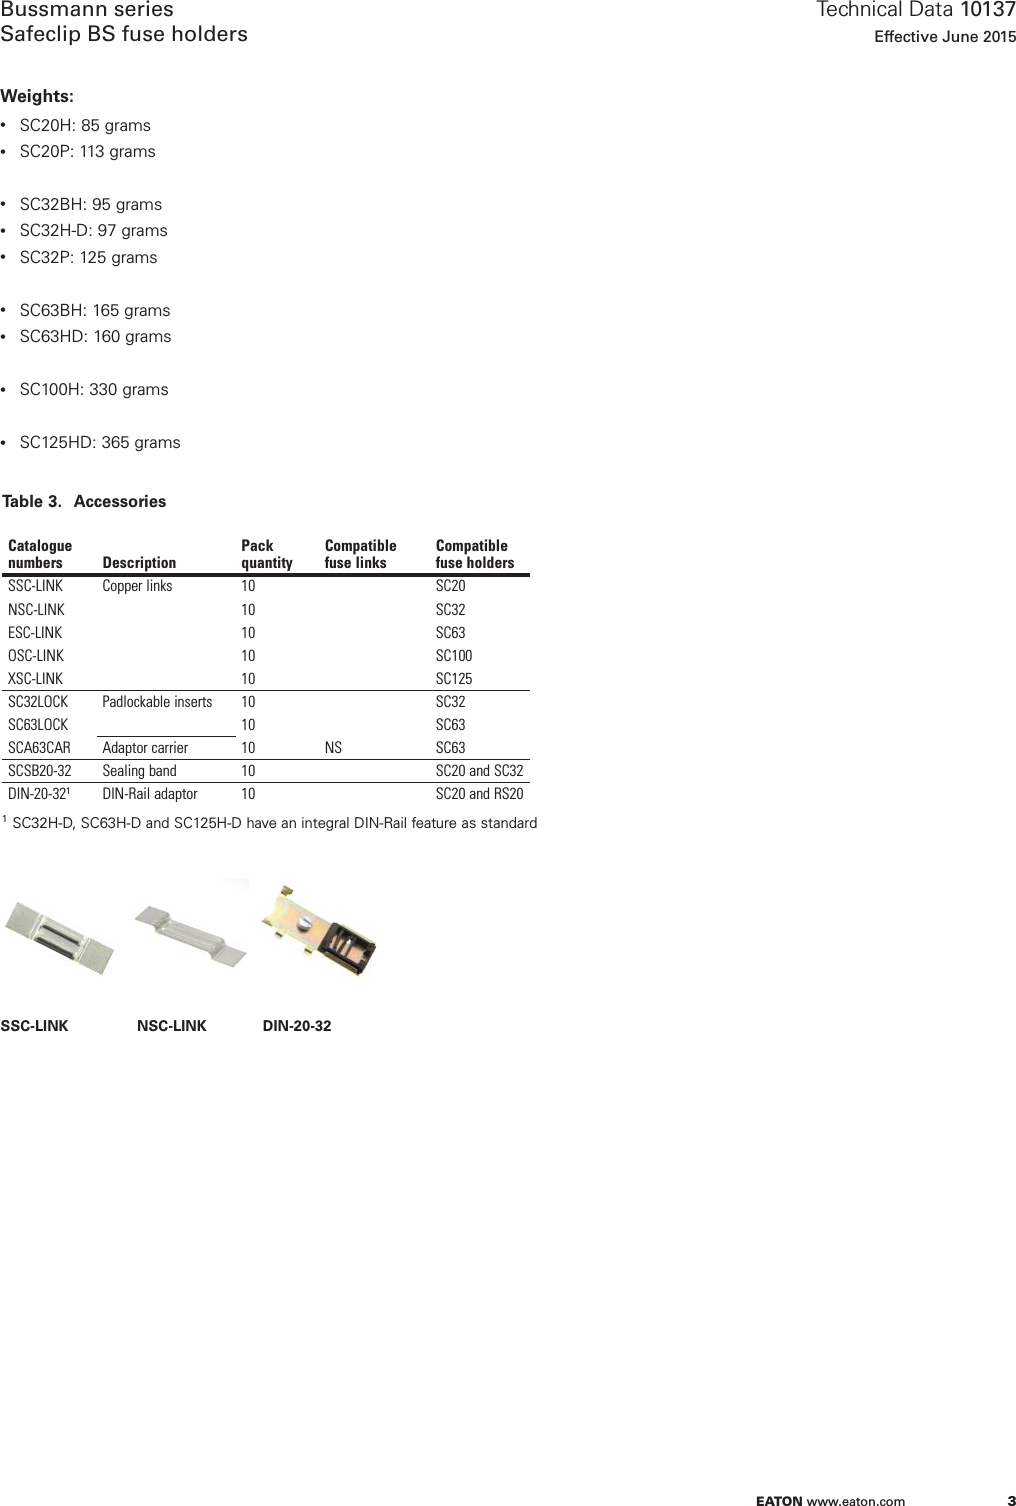 Page 3 of 10 - Bus-iec-ds-10137-safeclipfuseholders  Brochure